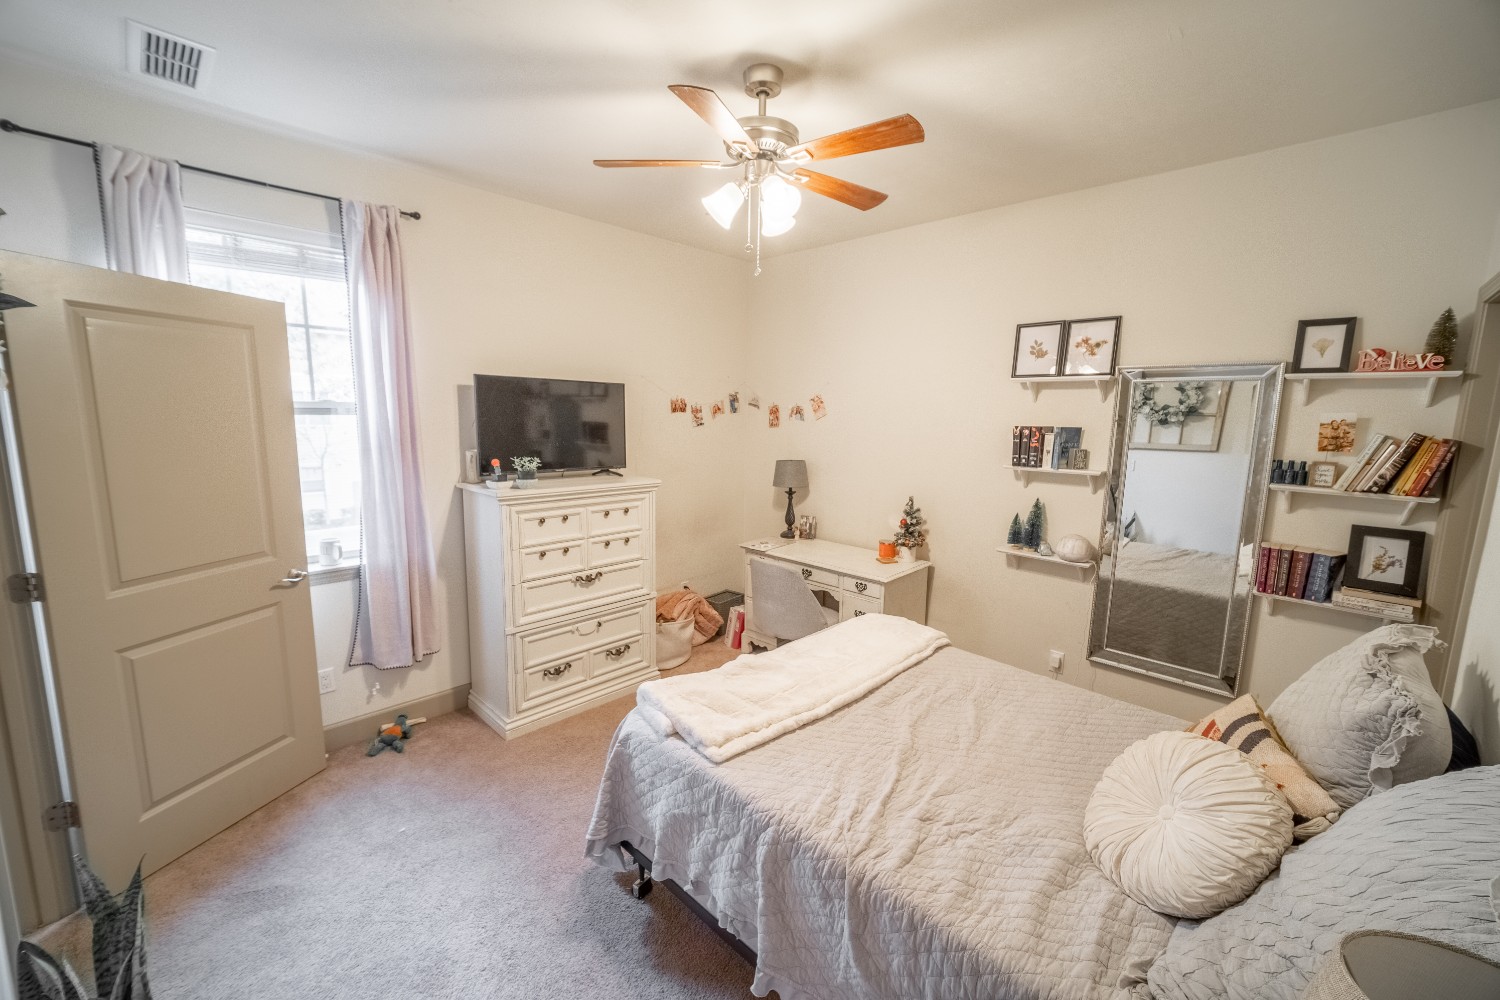 Plenty of room for full/queen size bed, dresser, and desk in these spacious bedrooms